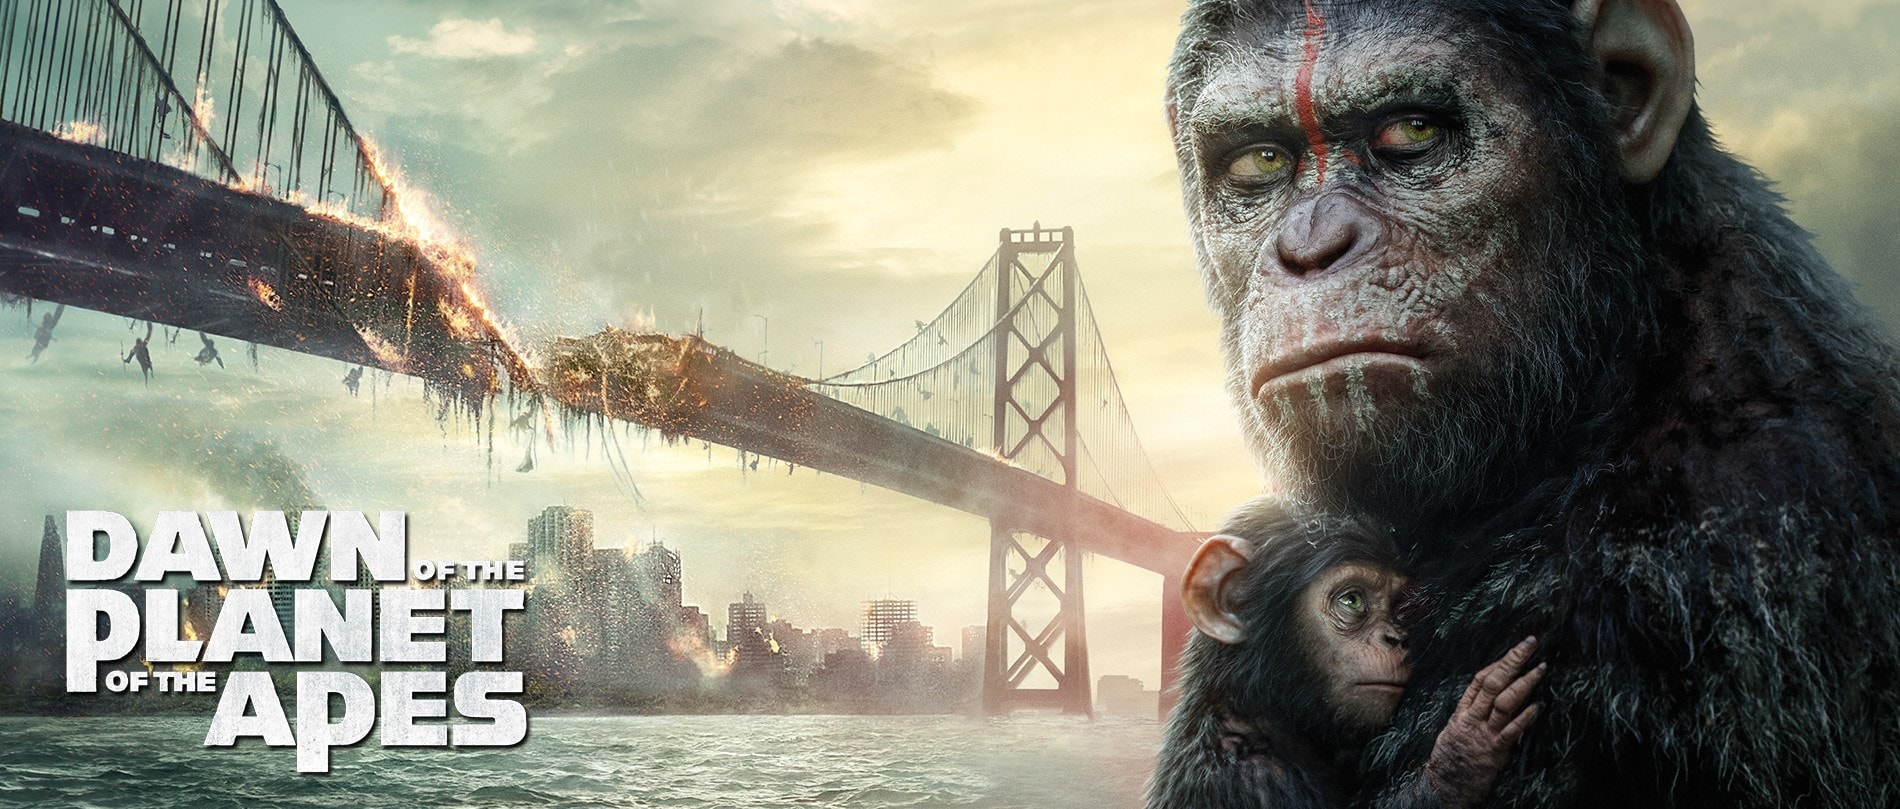 Dawn of the Planet of the Apes 4K 2014 big poster